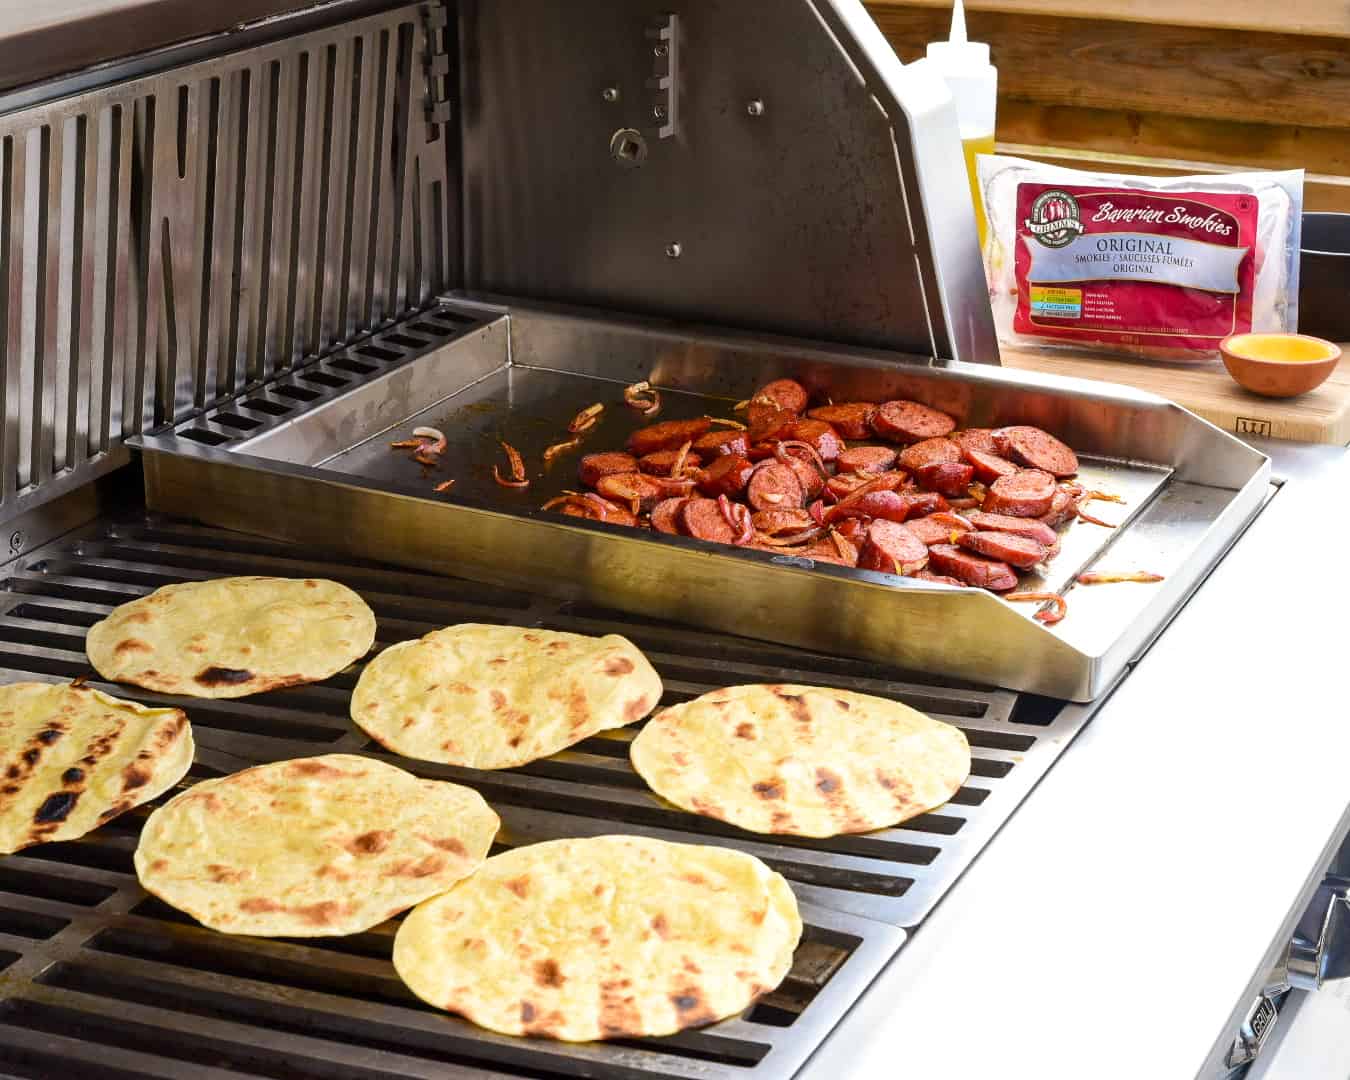 Sliced sausages and tortillas on the grill